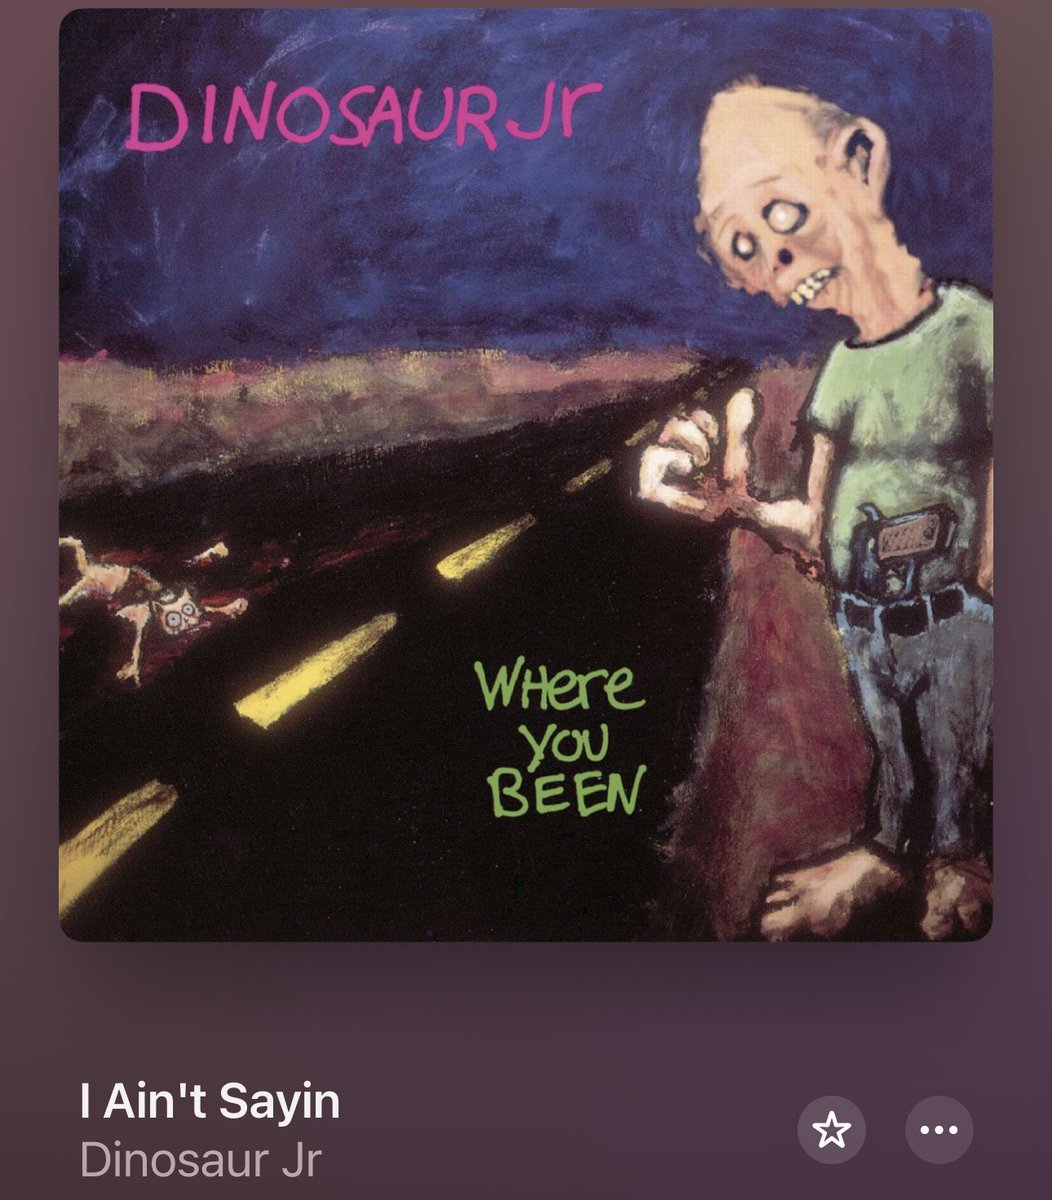 Is it just me or is the main guitar riff very reminiscent of Star Wars?

#DinosaurJr